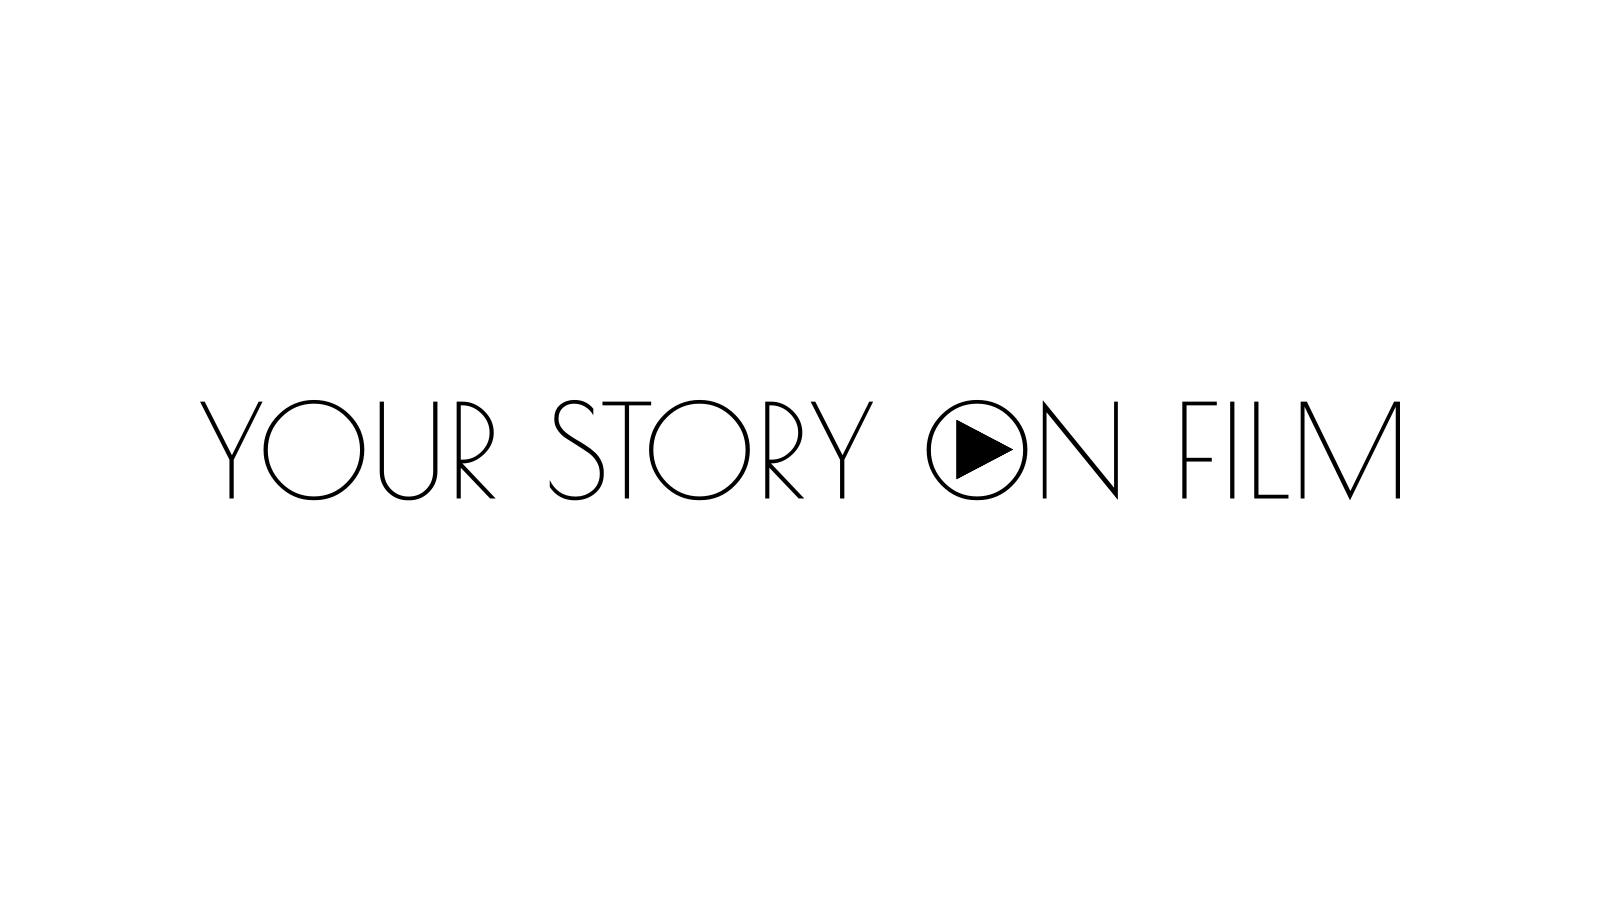 YOUR STORY ON FILM Logo Sample - white.png